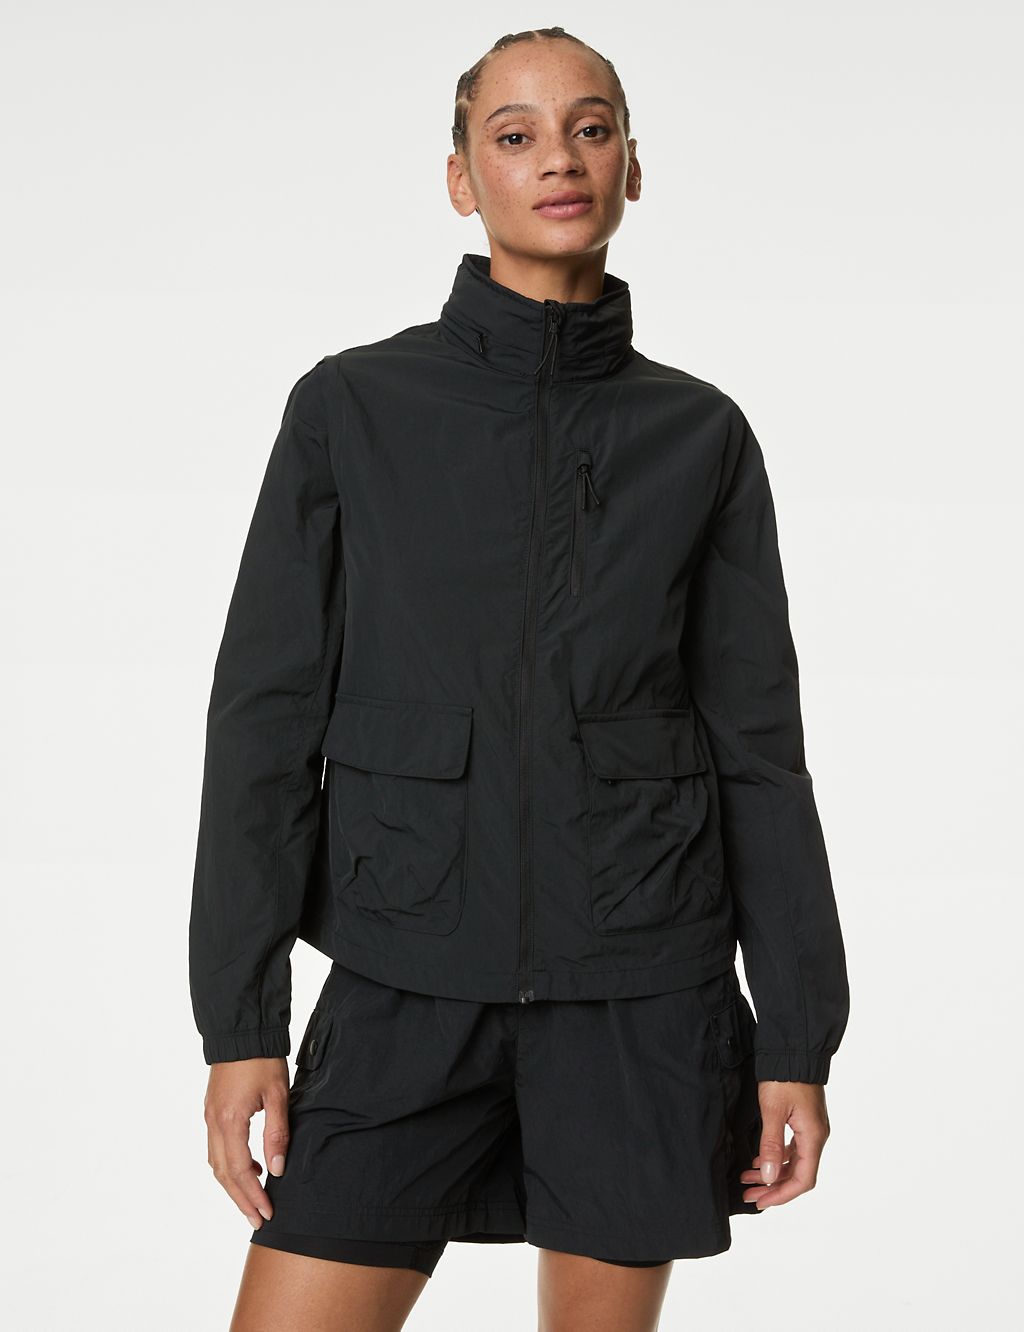 Convertible Sports Jacket with Stormwear™ 7 of 8